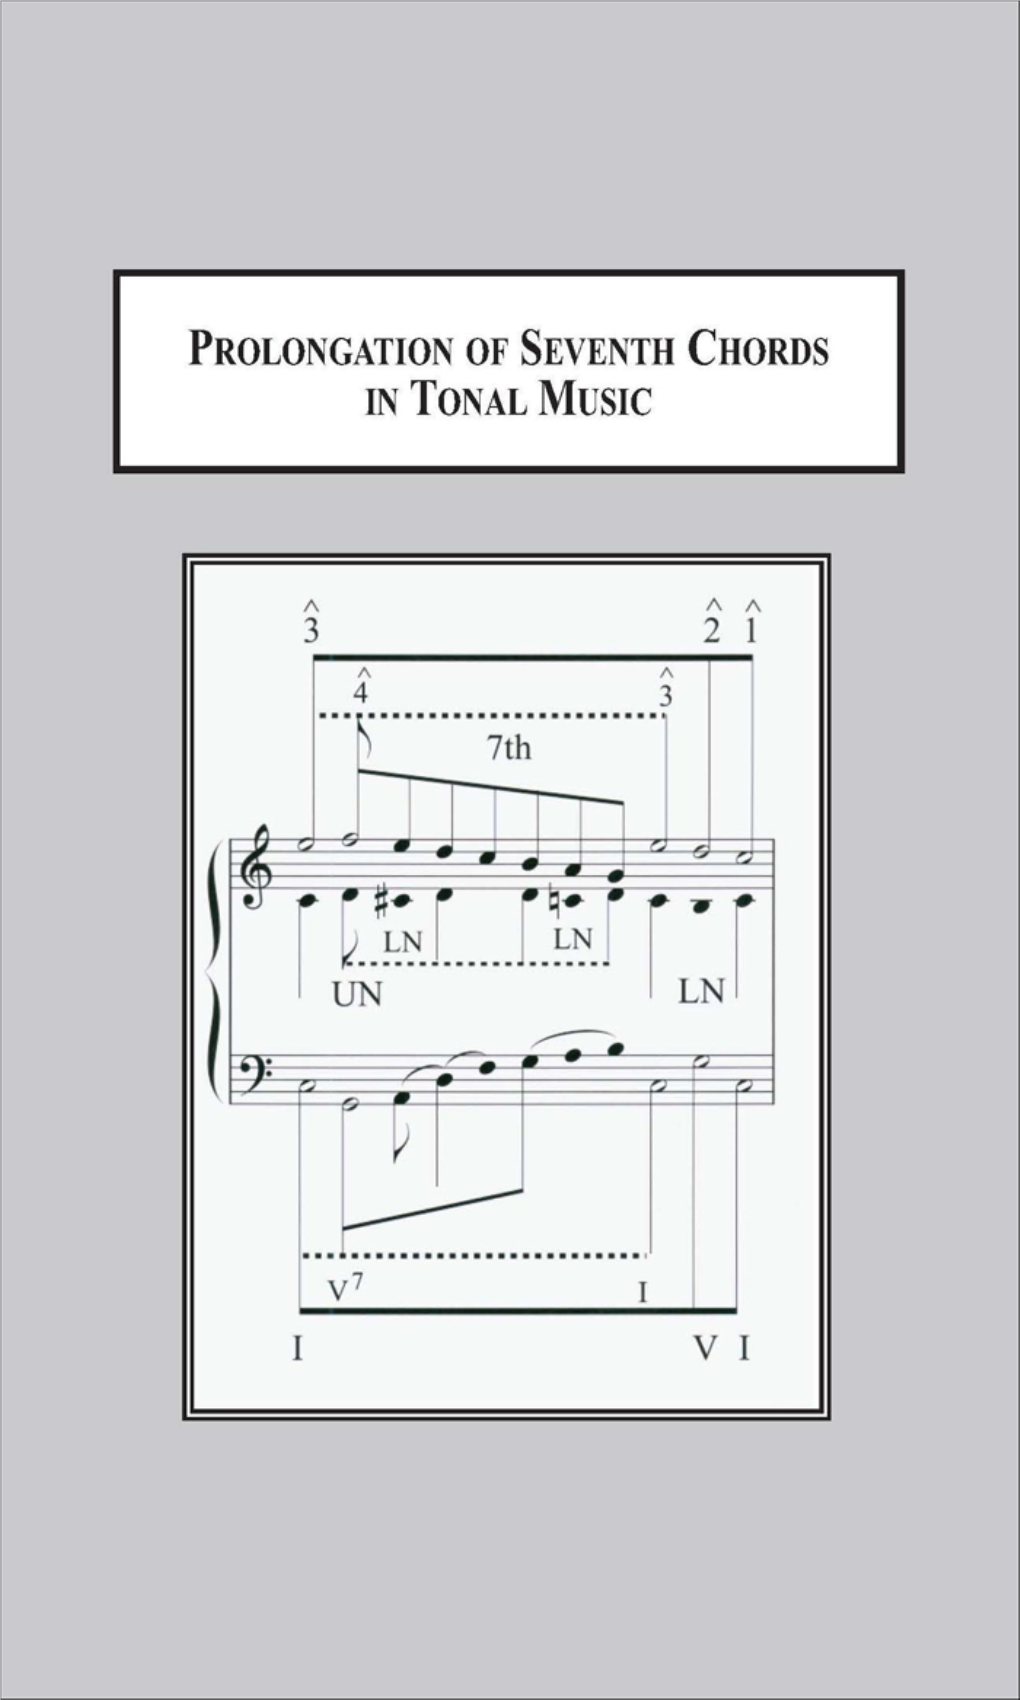 Prolongation of Seventh Chords in Tonal Music